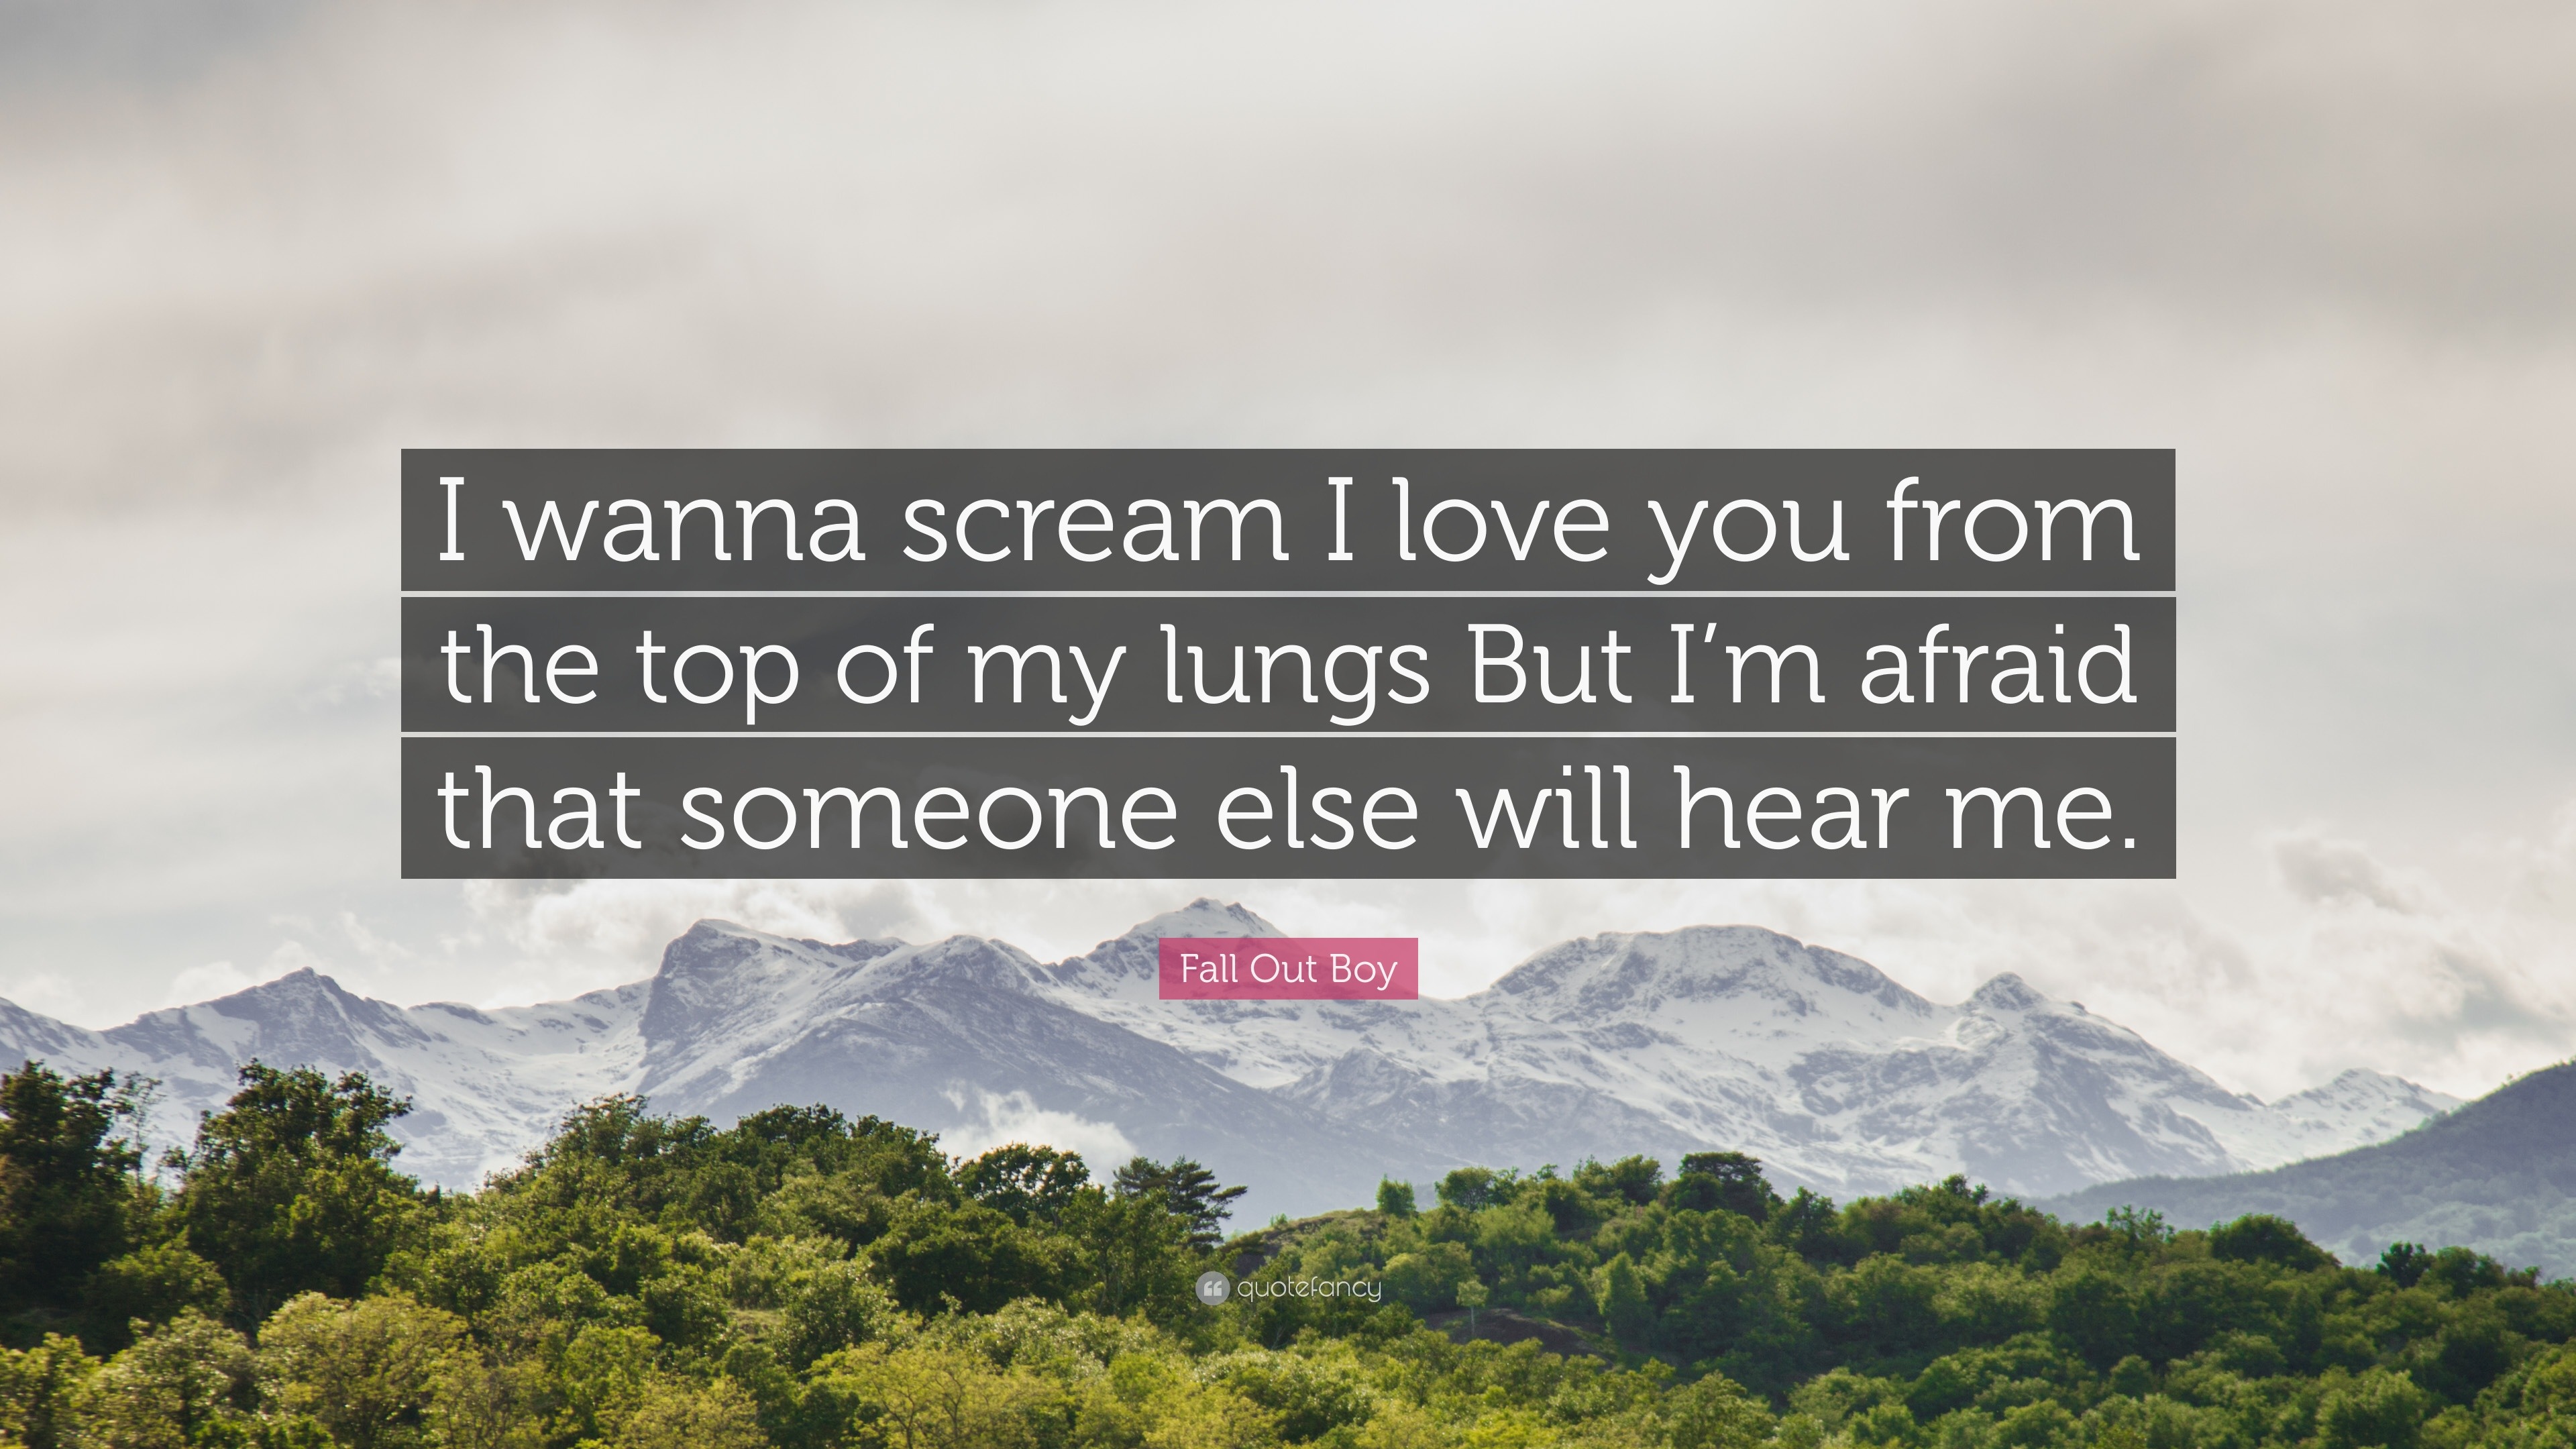 Fall Out Boy Quote “I wanna scream I love you from the top of